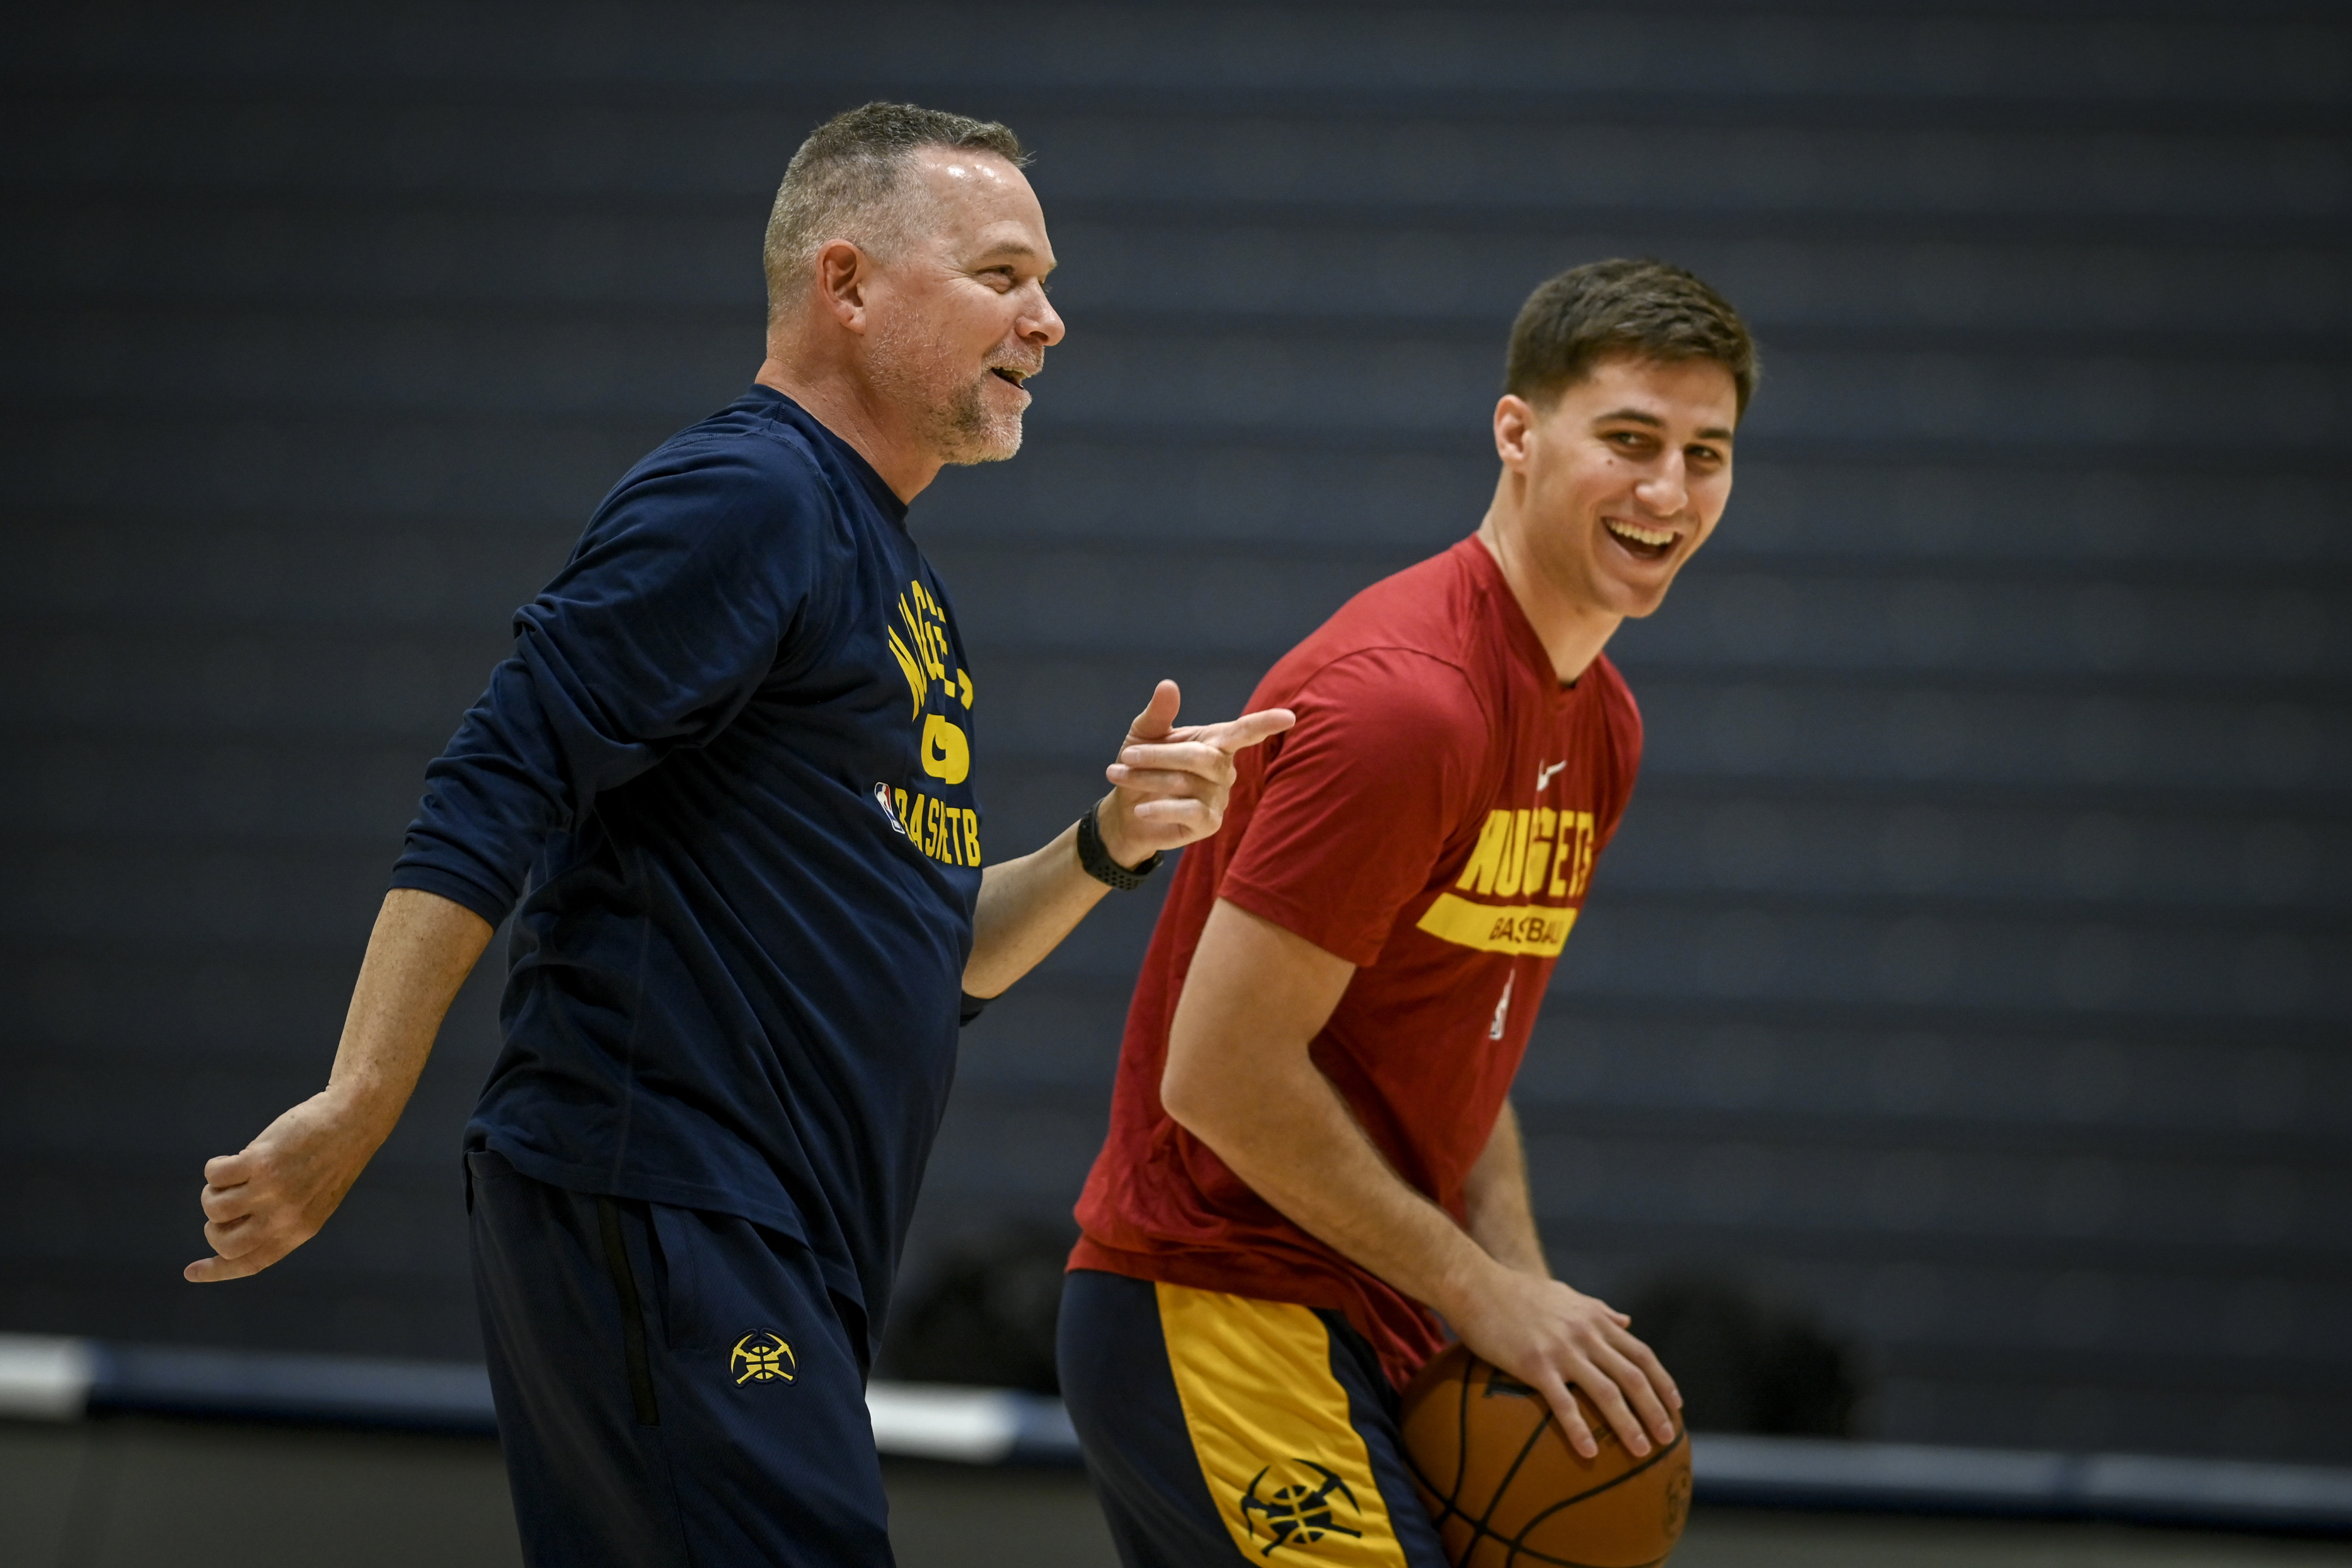 Denver Nuggets head coach Michael Malone shoots and jokes around with Collin Gillespie during the teams training camp at the UCSD campus in La Jolla, California on Wednesday, September 27, 2022.